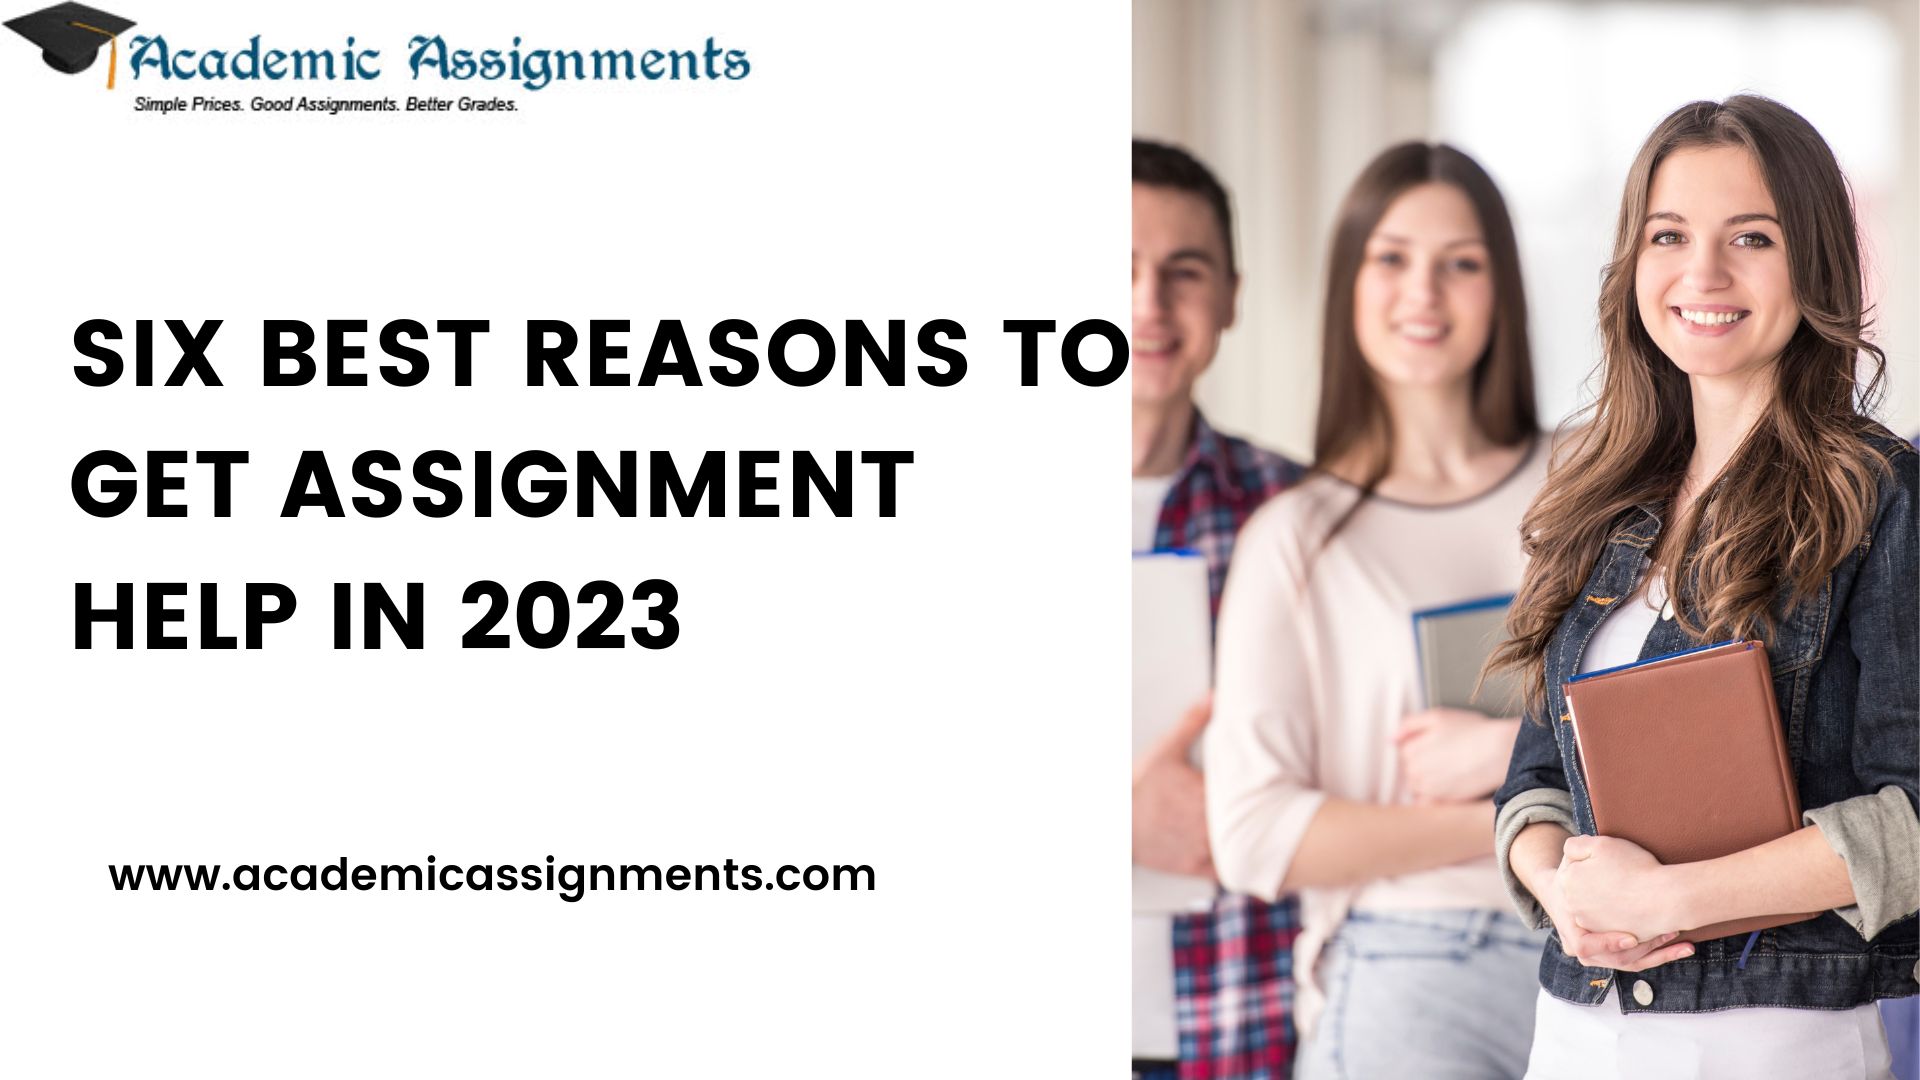 Six Best Reasons to Get Assignment Help in 2023